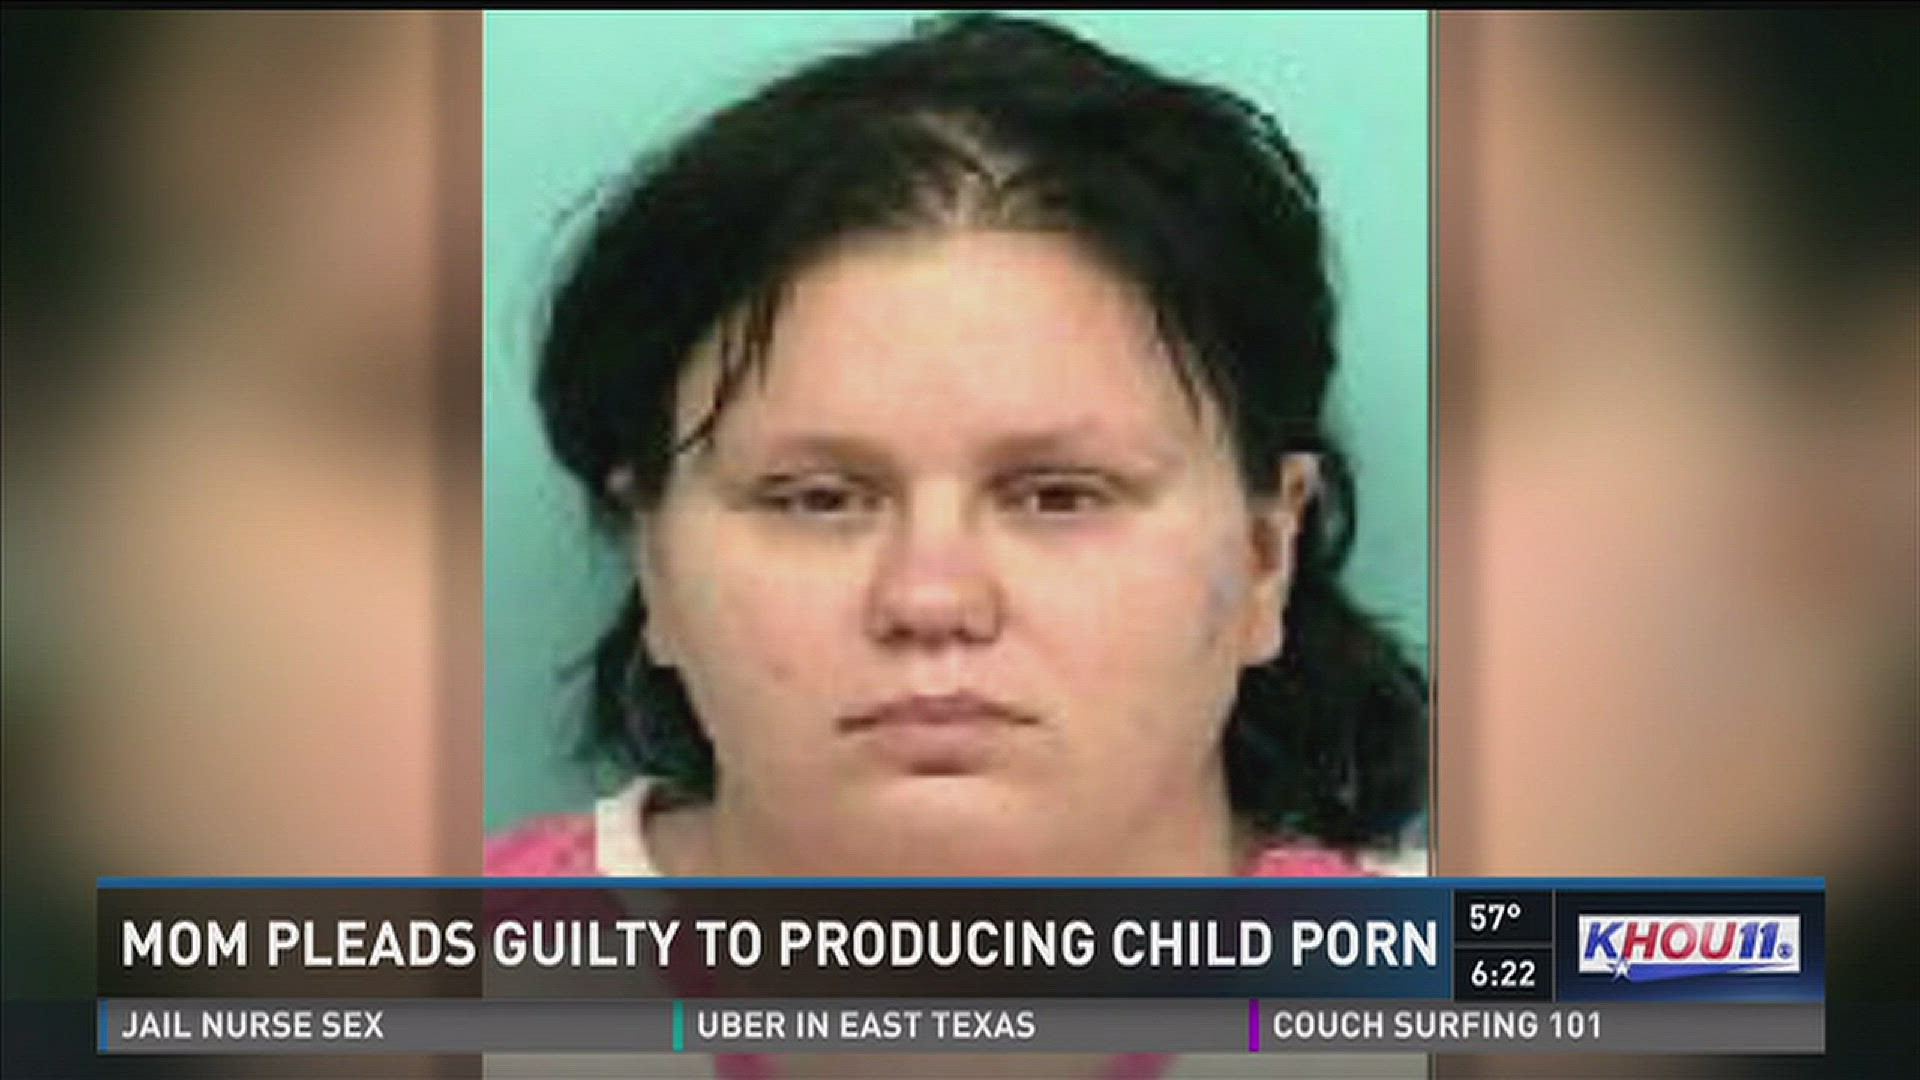 Vanessa Ganung was sentenced to 40 years in jail after making her young daughters expose themselves on camera.